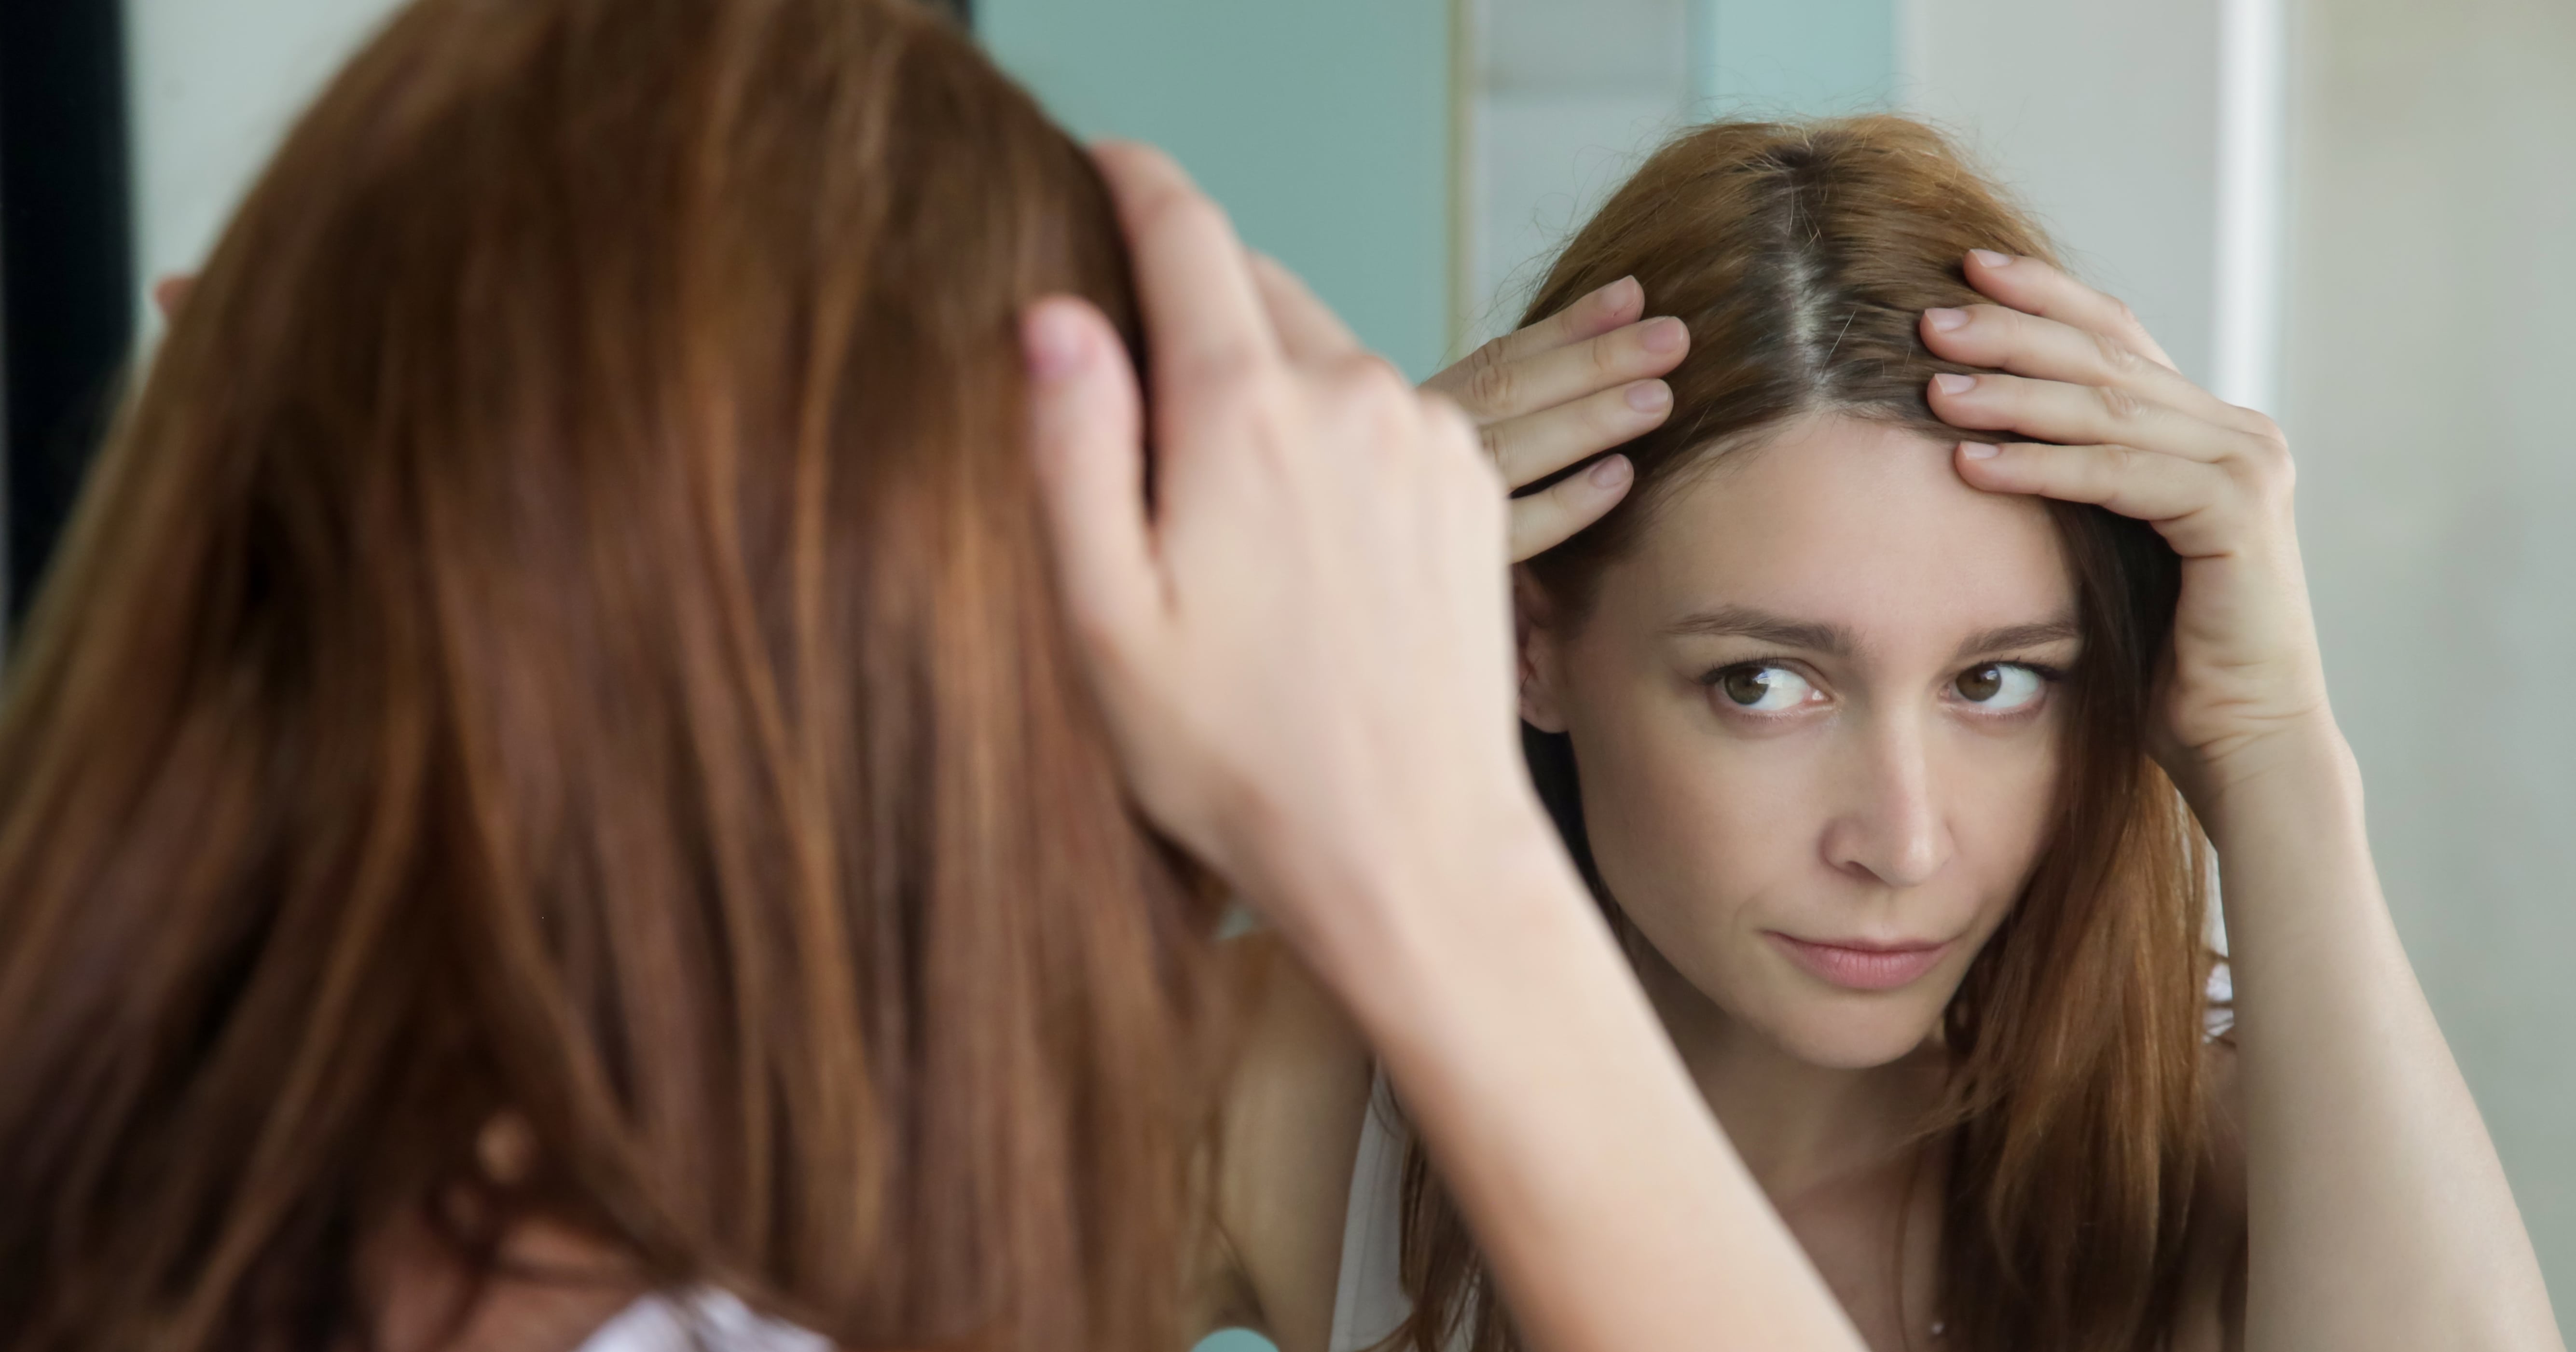 Causes of an Itchy Scalp, According to an Expert